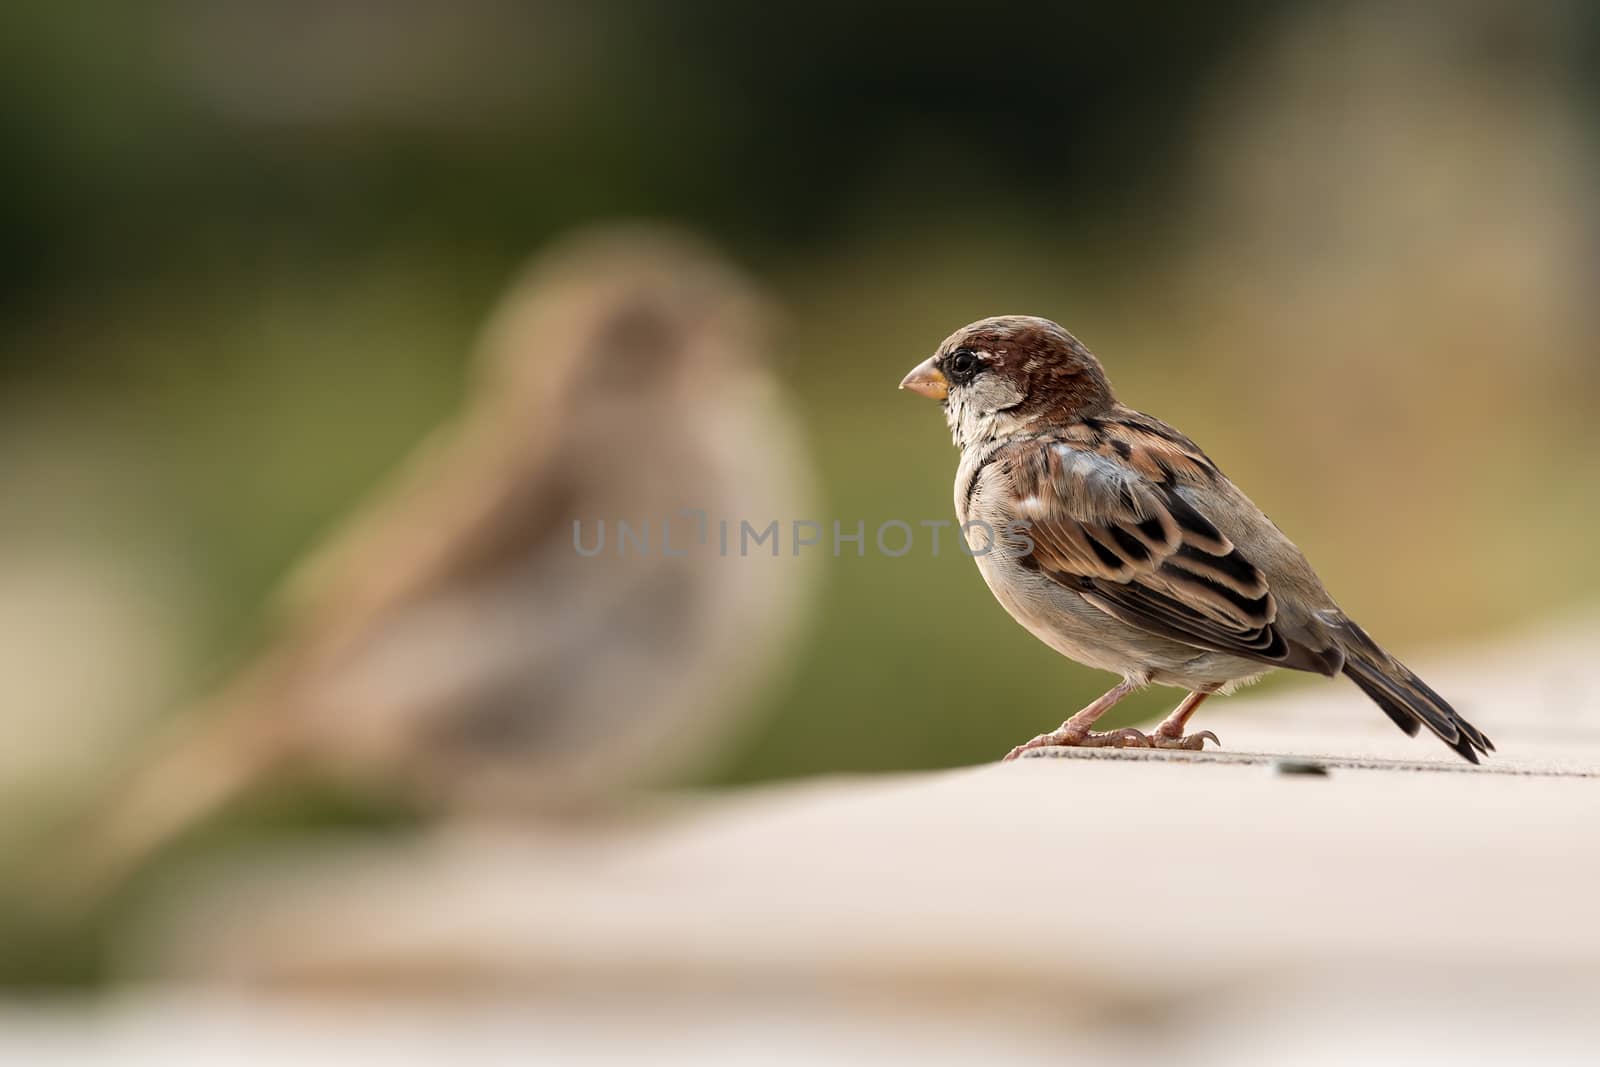 Young male sparrow (Passer domesticus by Digoarpi